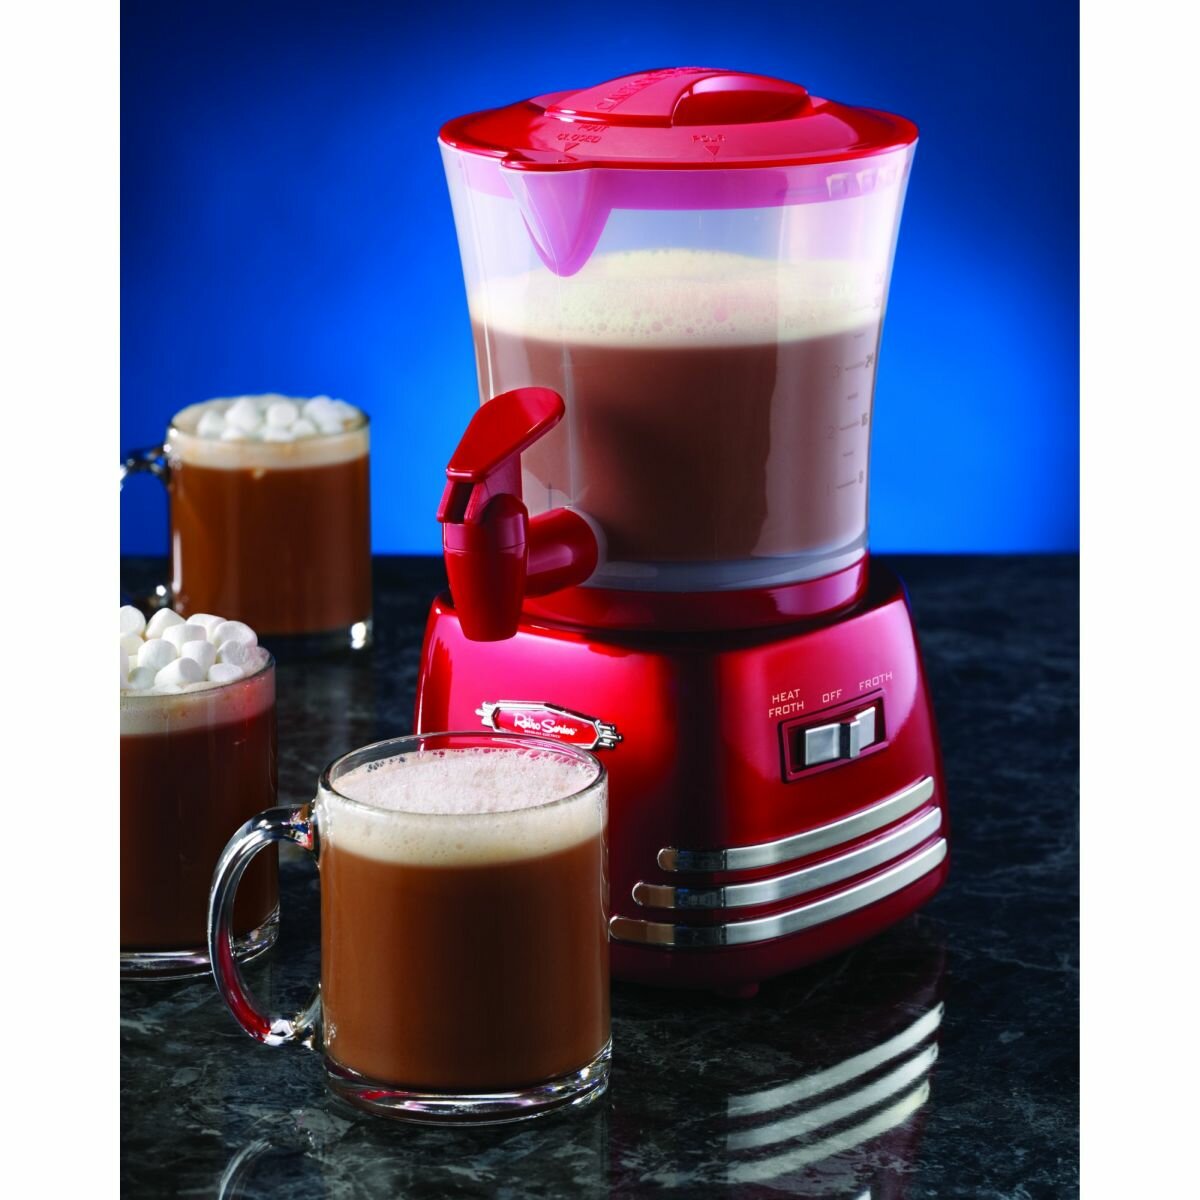 Where can you purchase hot chocolate makers?